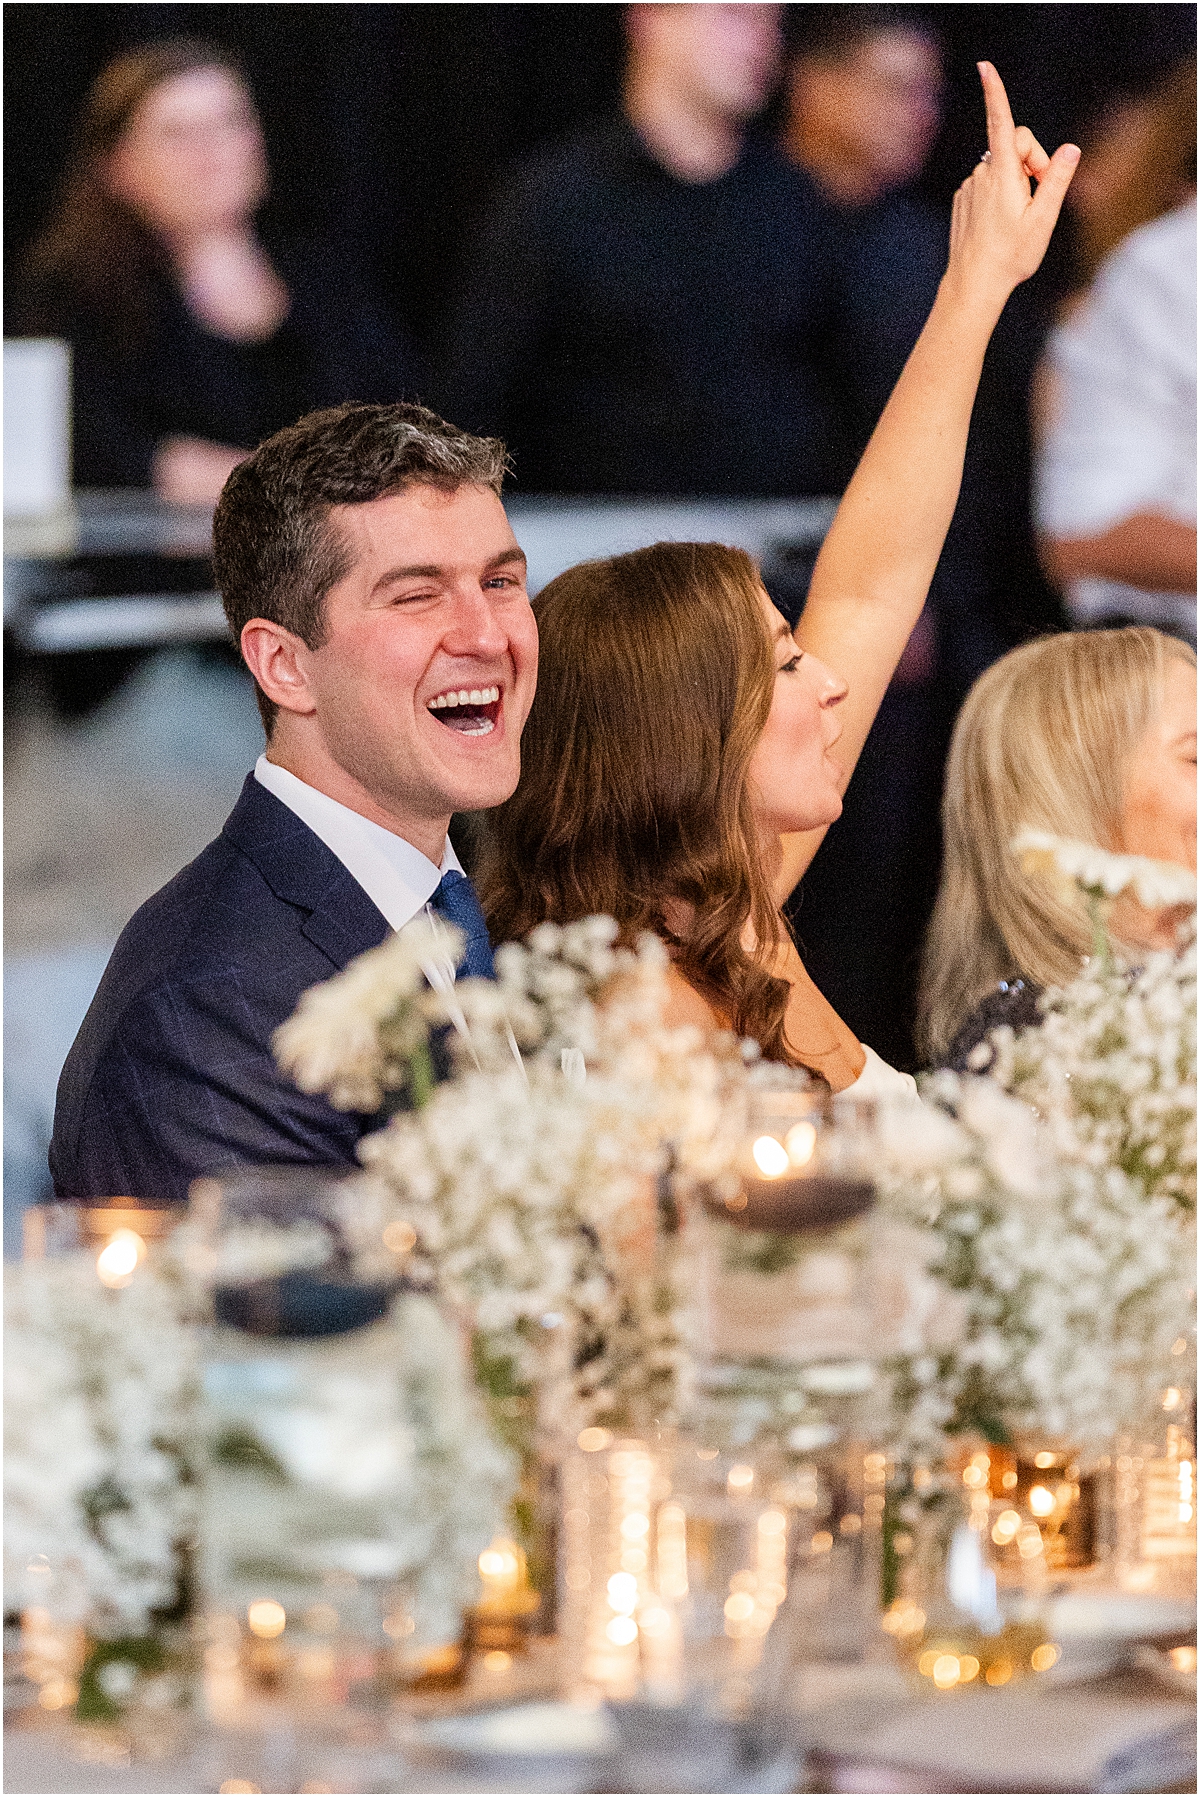 candid portraits from Chic Chicago Wedding Celebration at City Hall Chicago Events